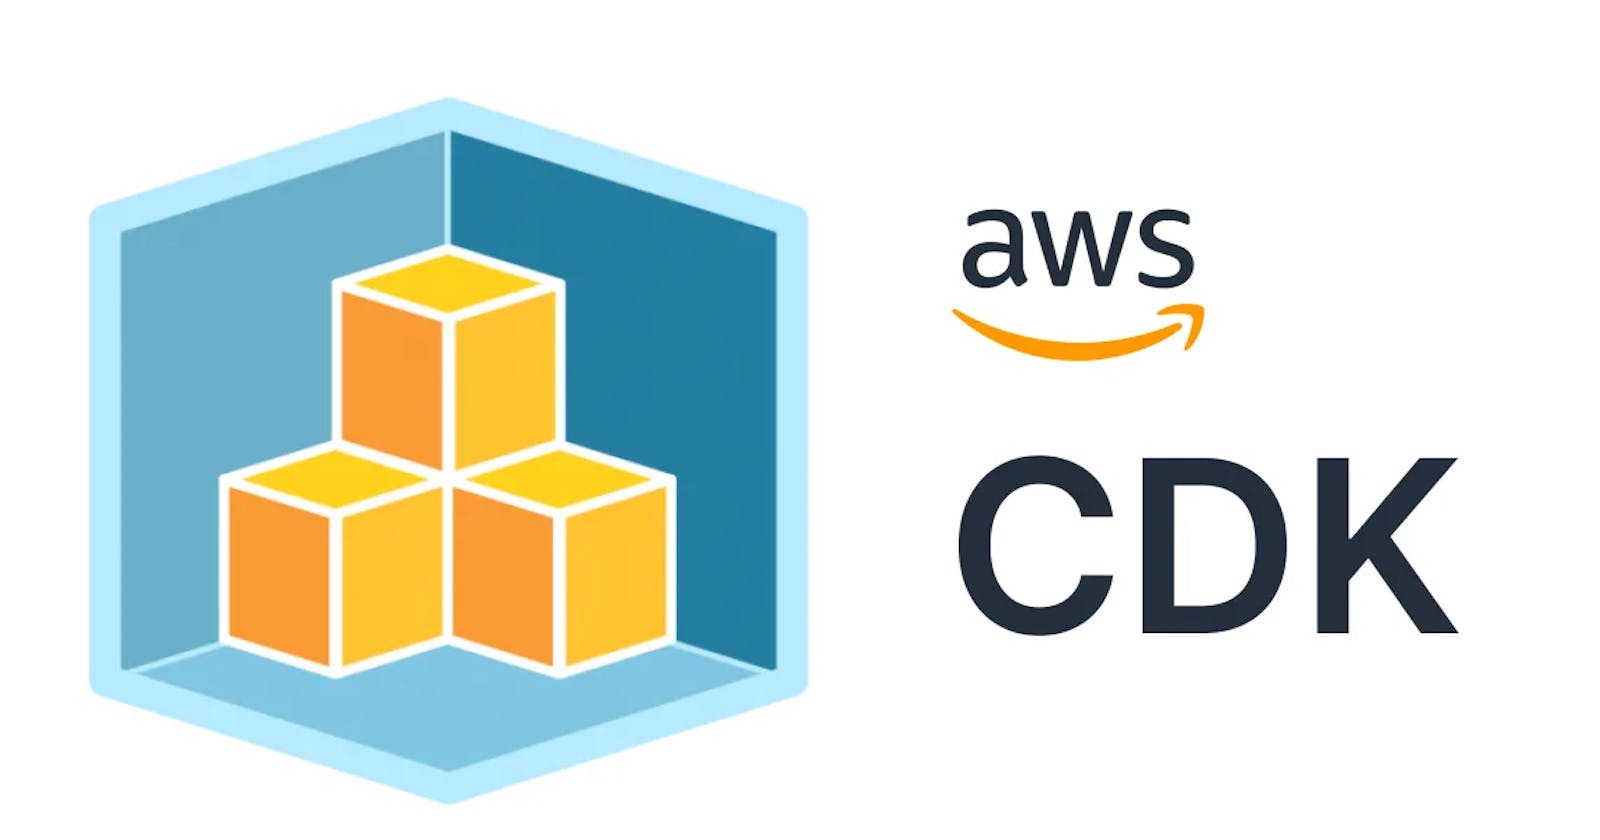 How to use Outputs in AWS CDK